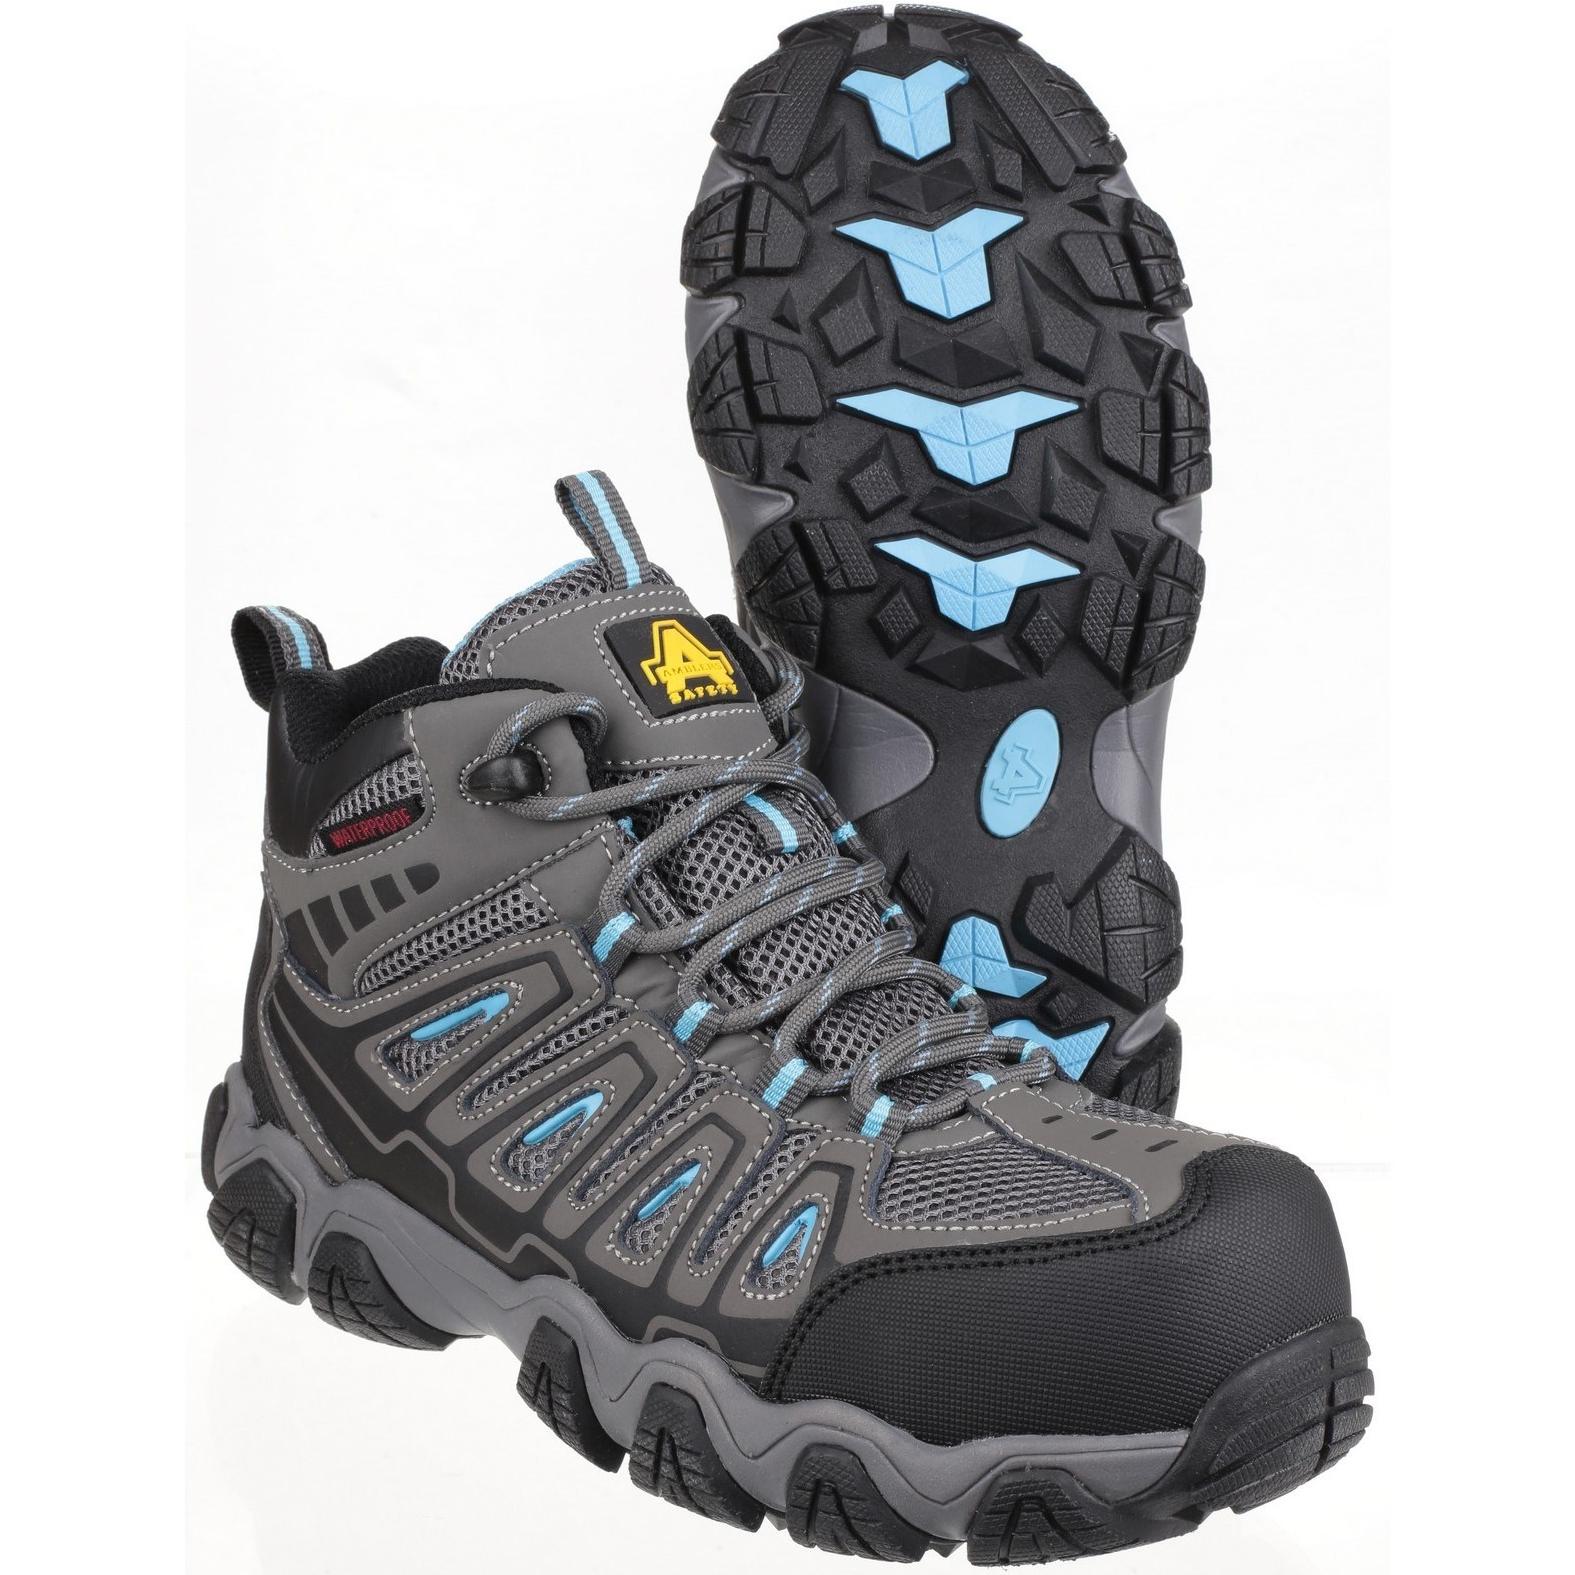 Amblers Safety AS802 Waterproof Non-Metal Ladies Safety Hiker Boots